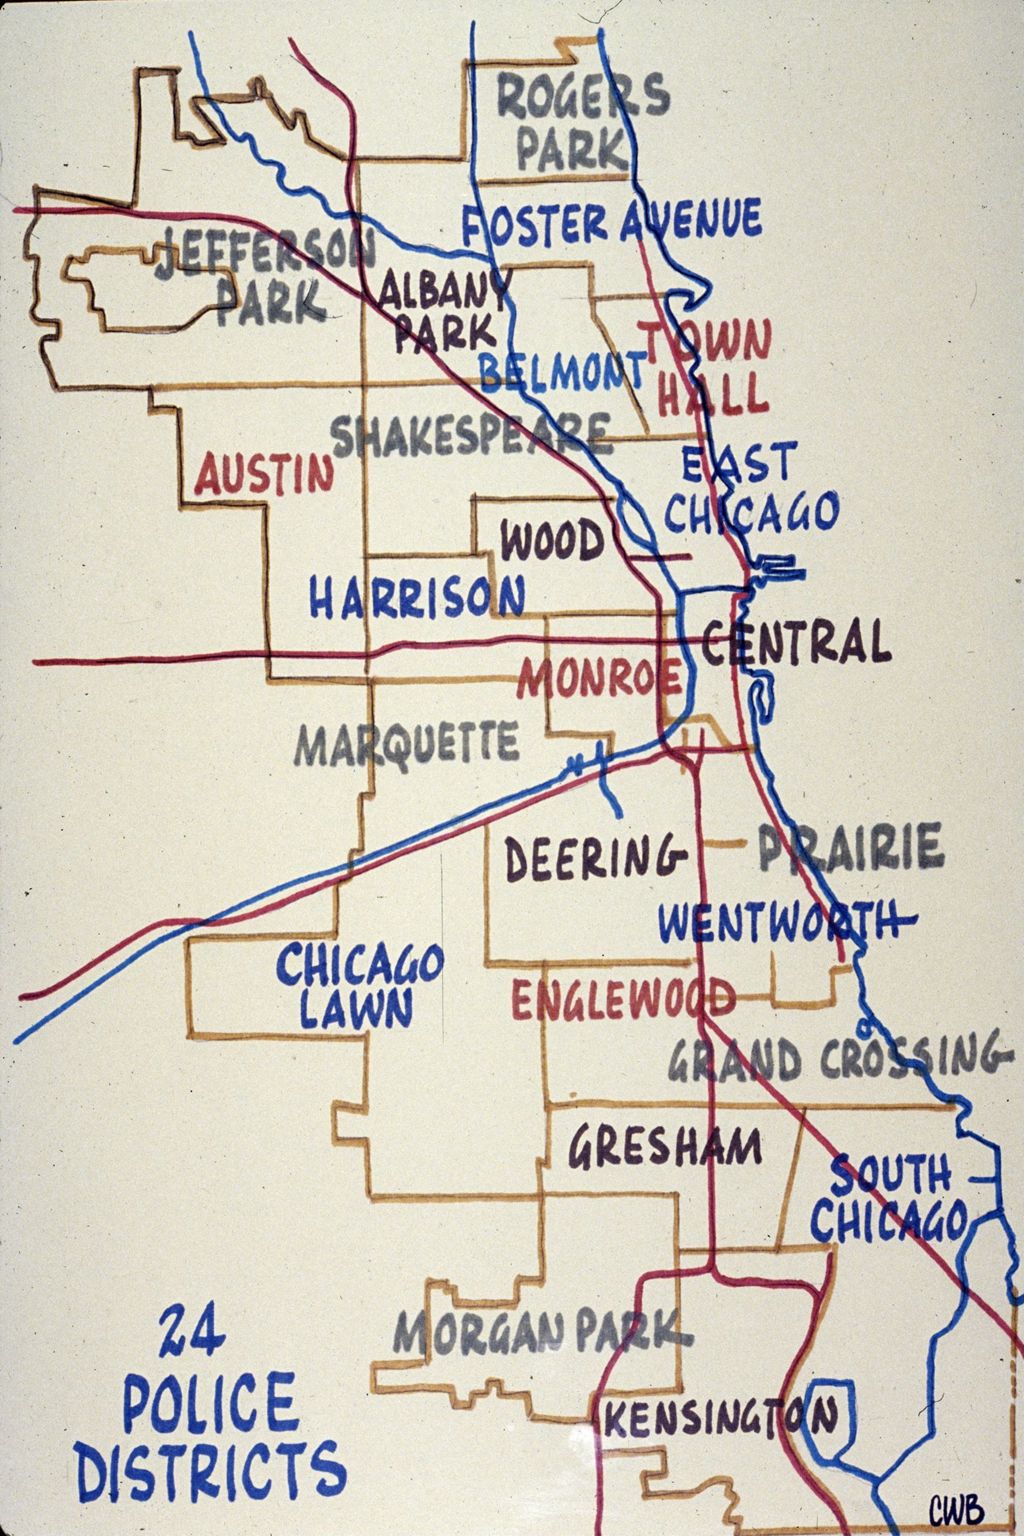 Chicago police districts